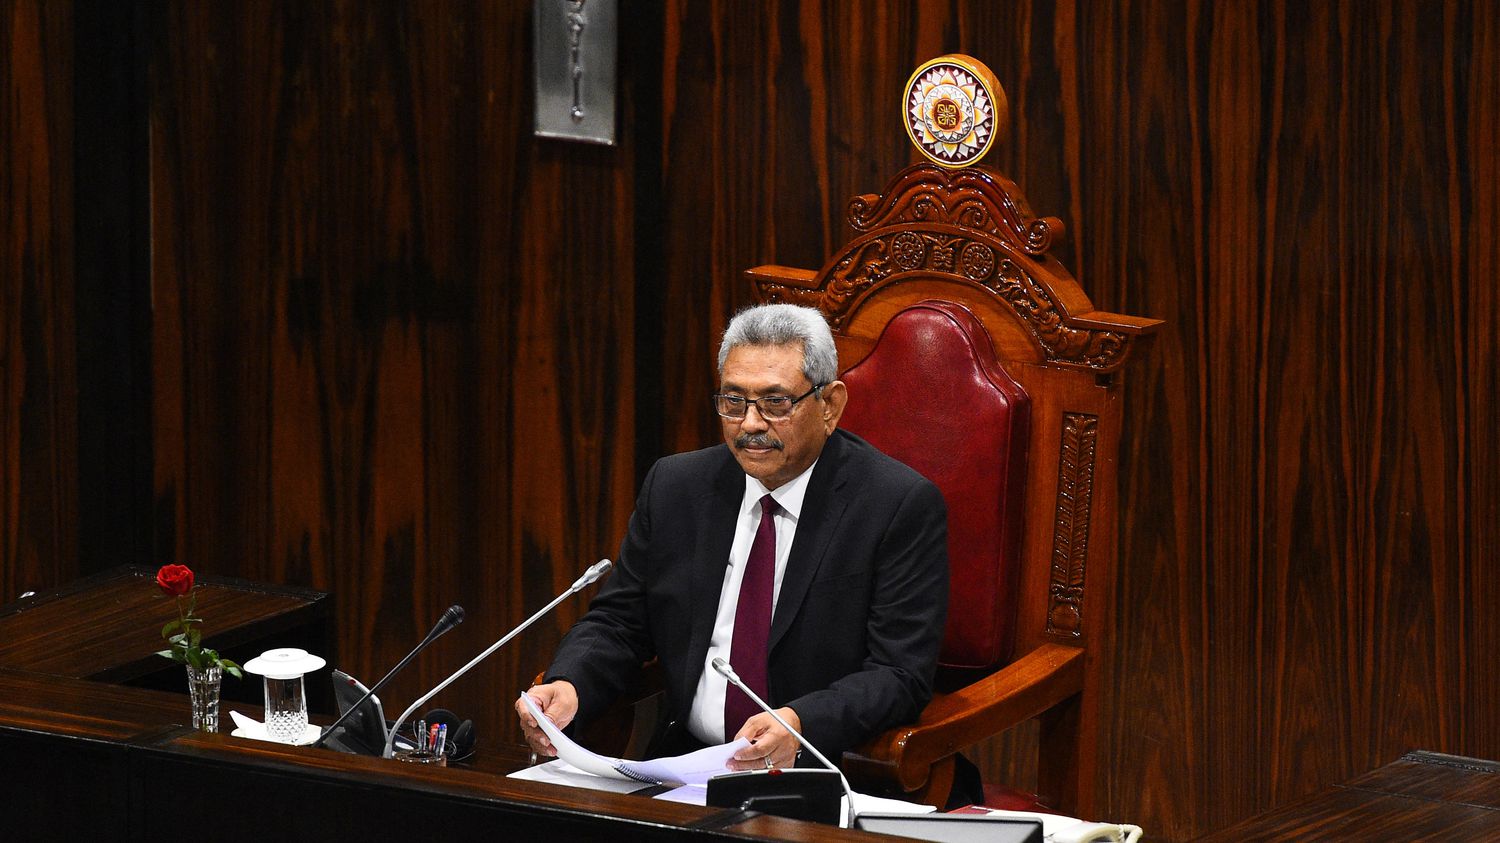 Sri Lanka: President announces his resignation to Parliament by email
